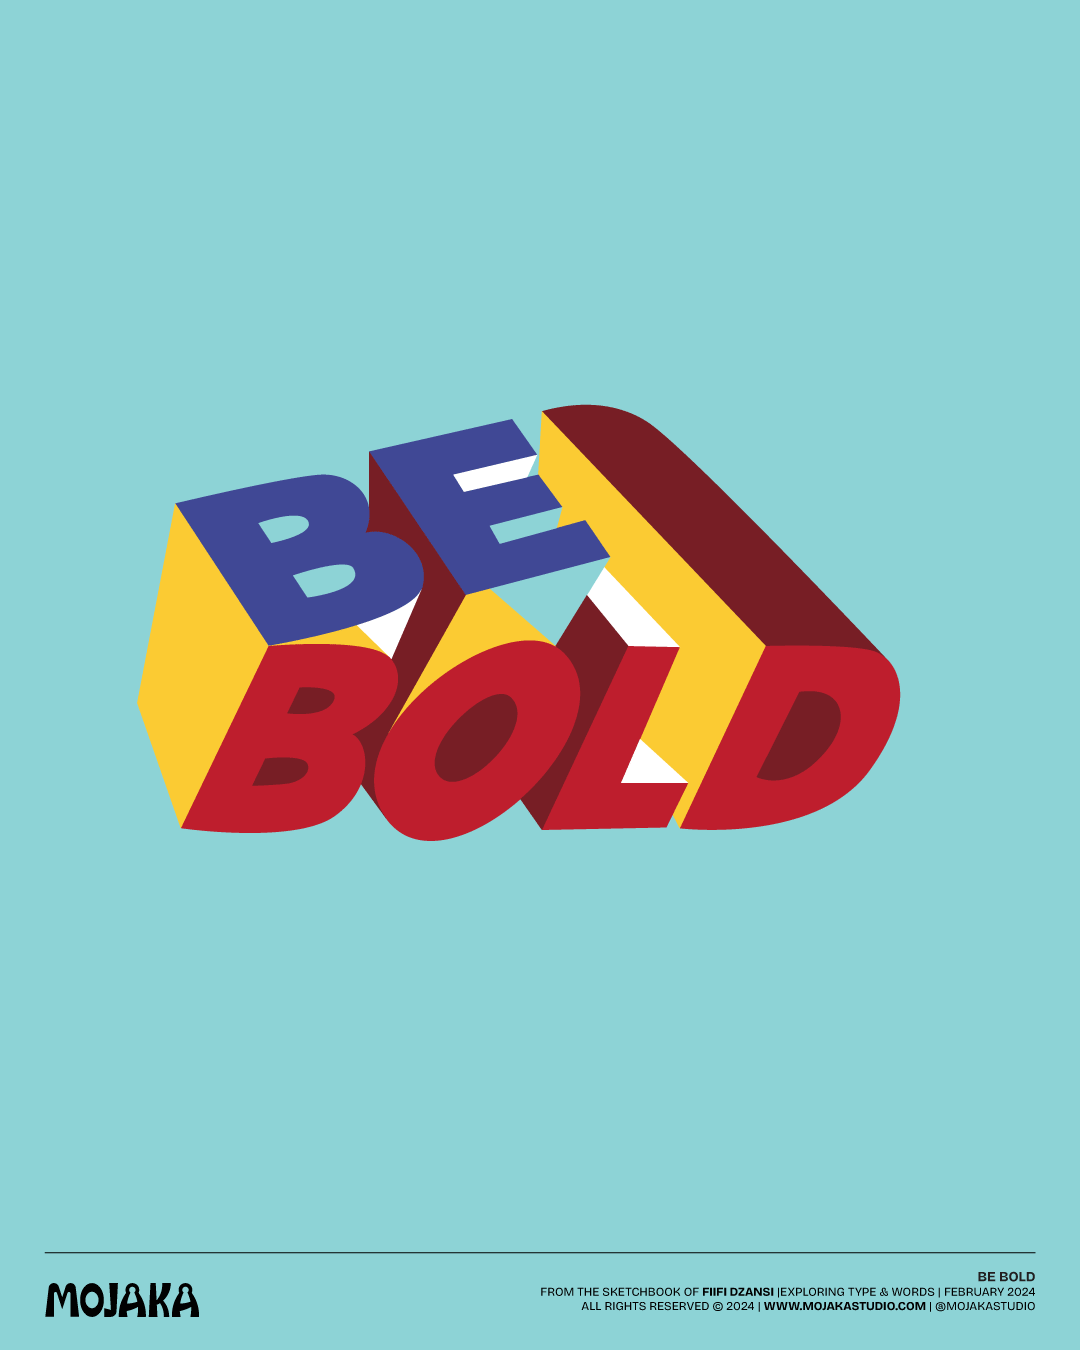 Type design of 'Be Bold' written in bold block letters